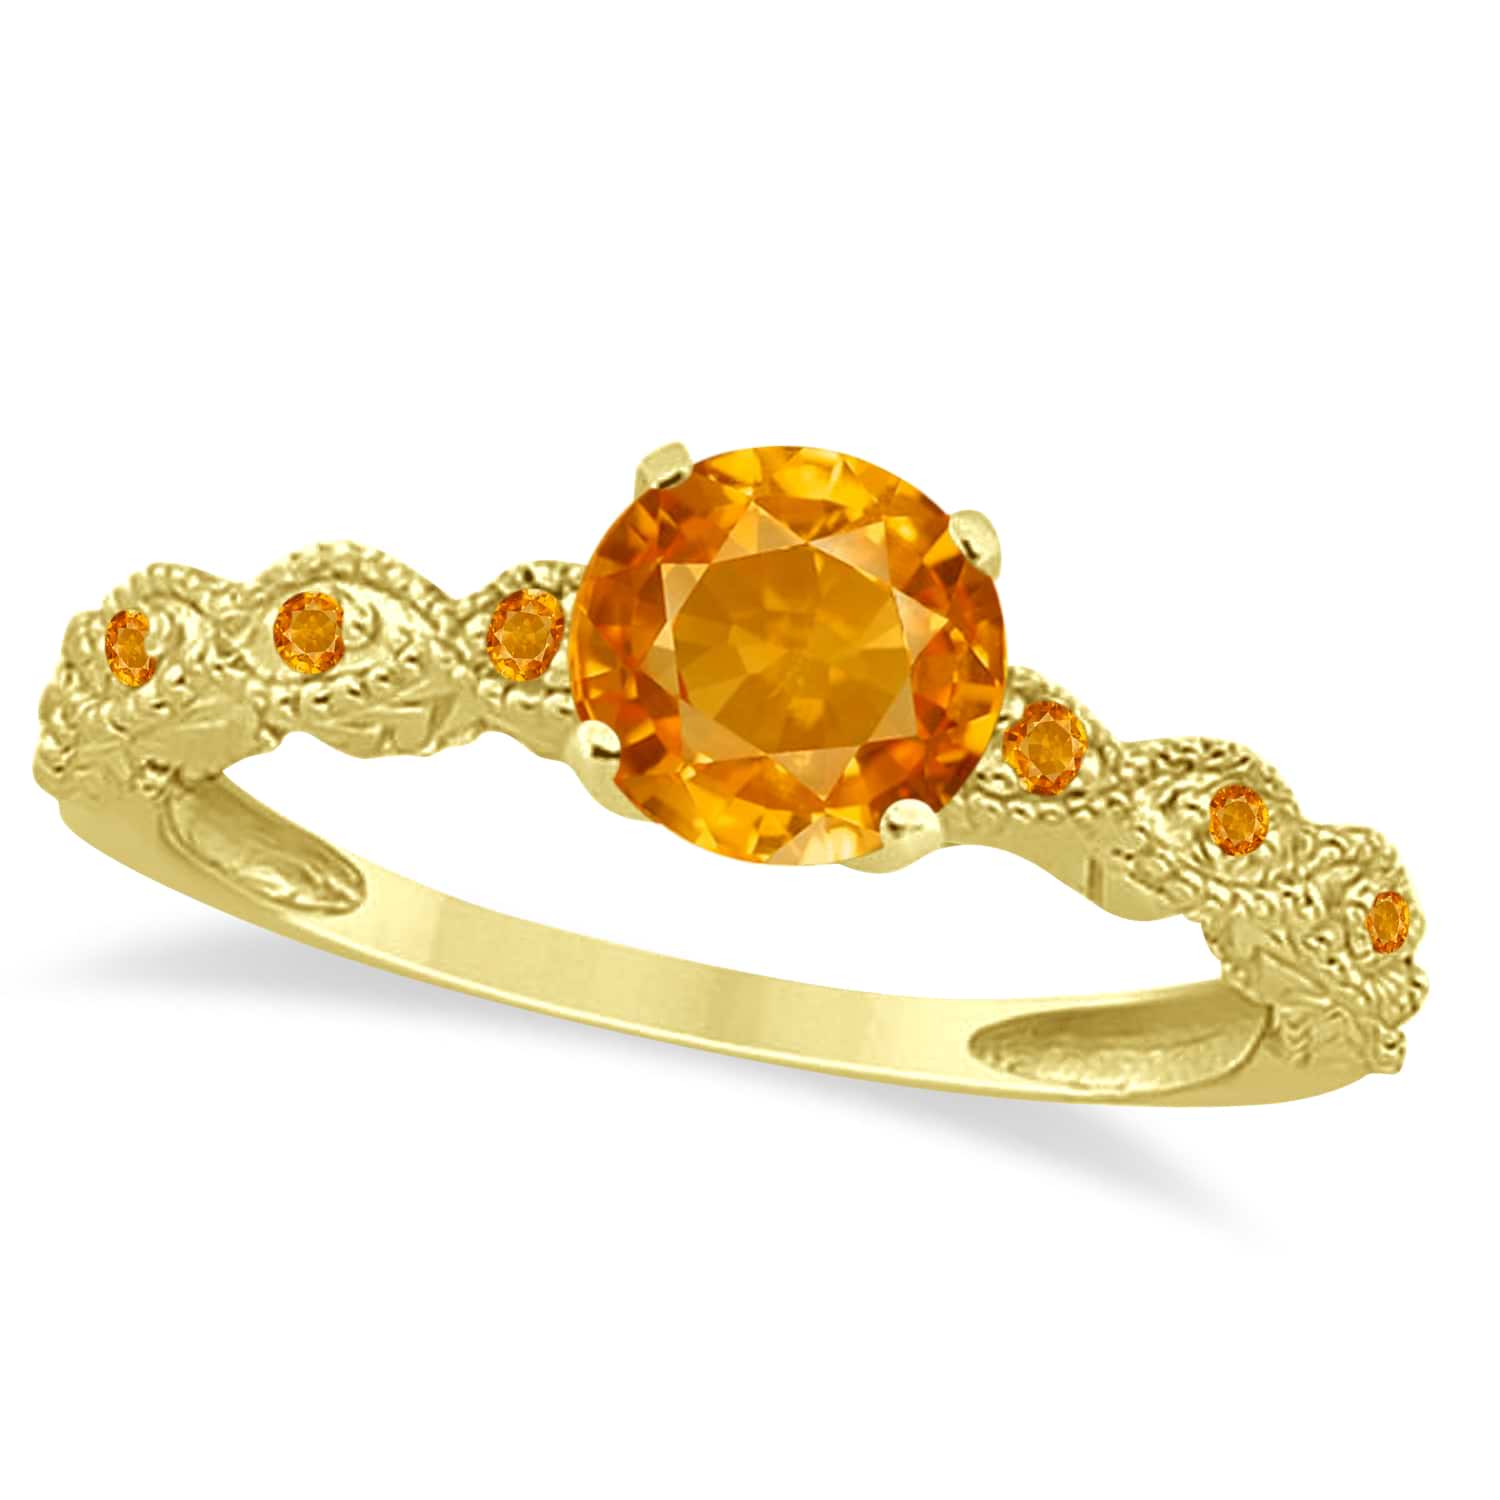 Vintage Style Citrine Engagement Ring 14k Yellow Gold (1.18ct)